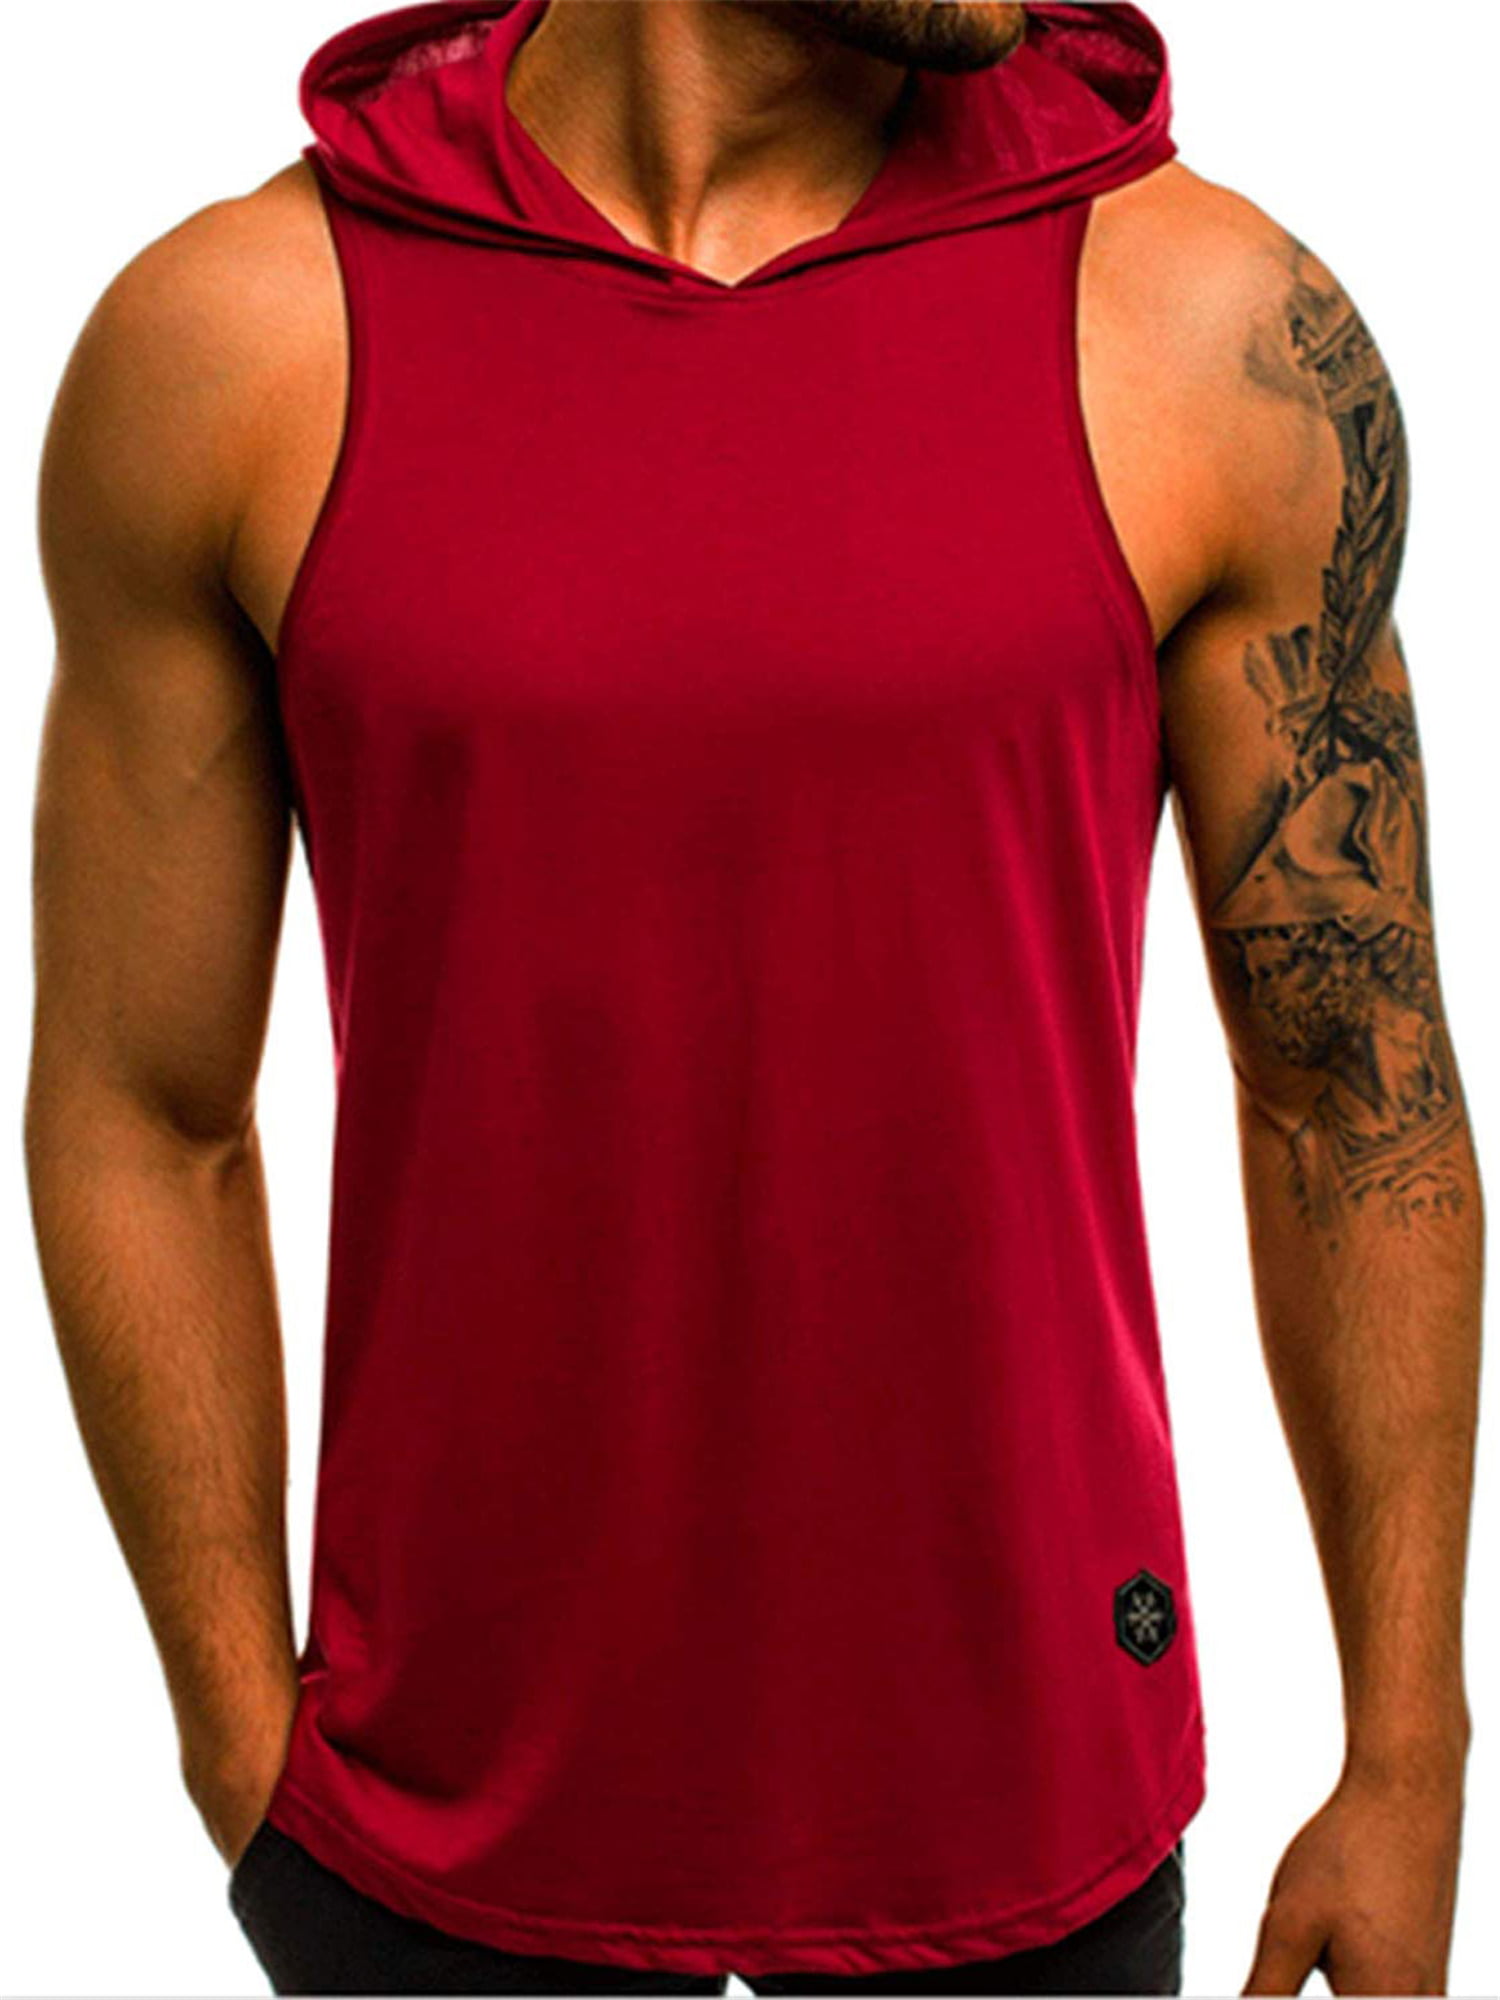 Magiftbox Mens Workout Hooded Tank Tops Sleeveless Gym Hoodies with Kanga Pocket Cool and Muscle Cut 